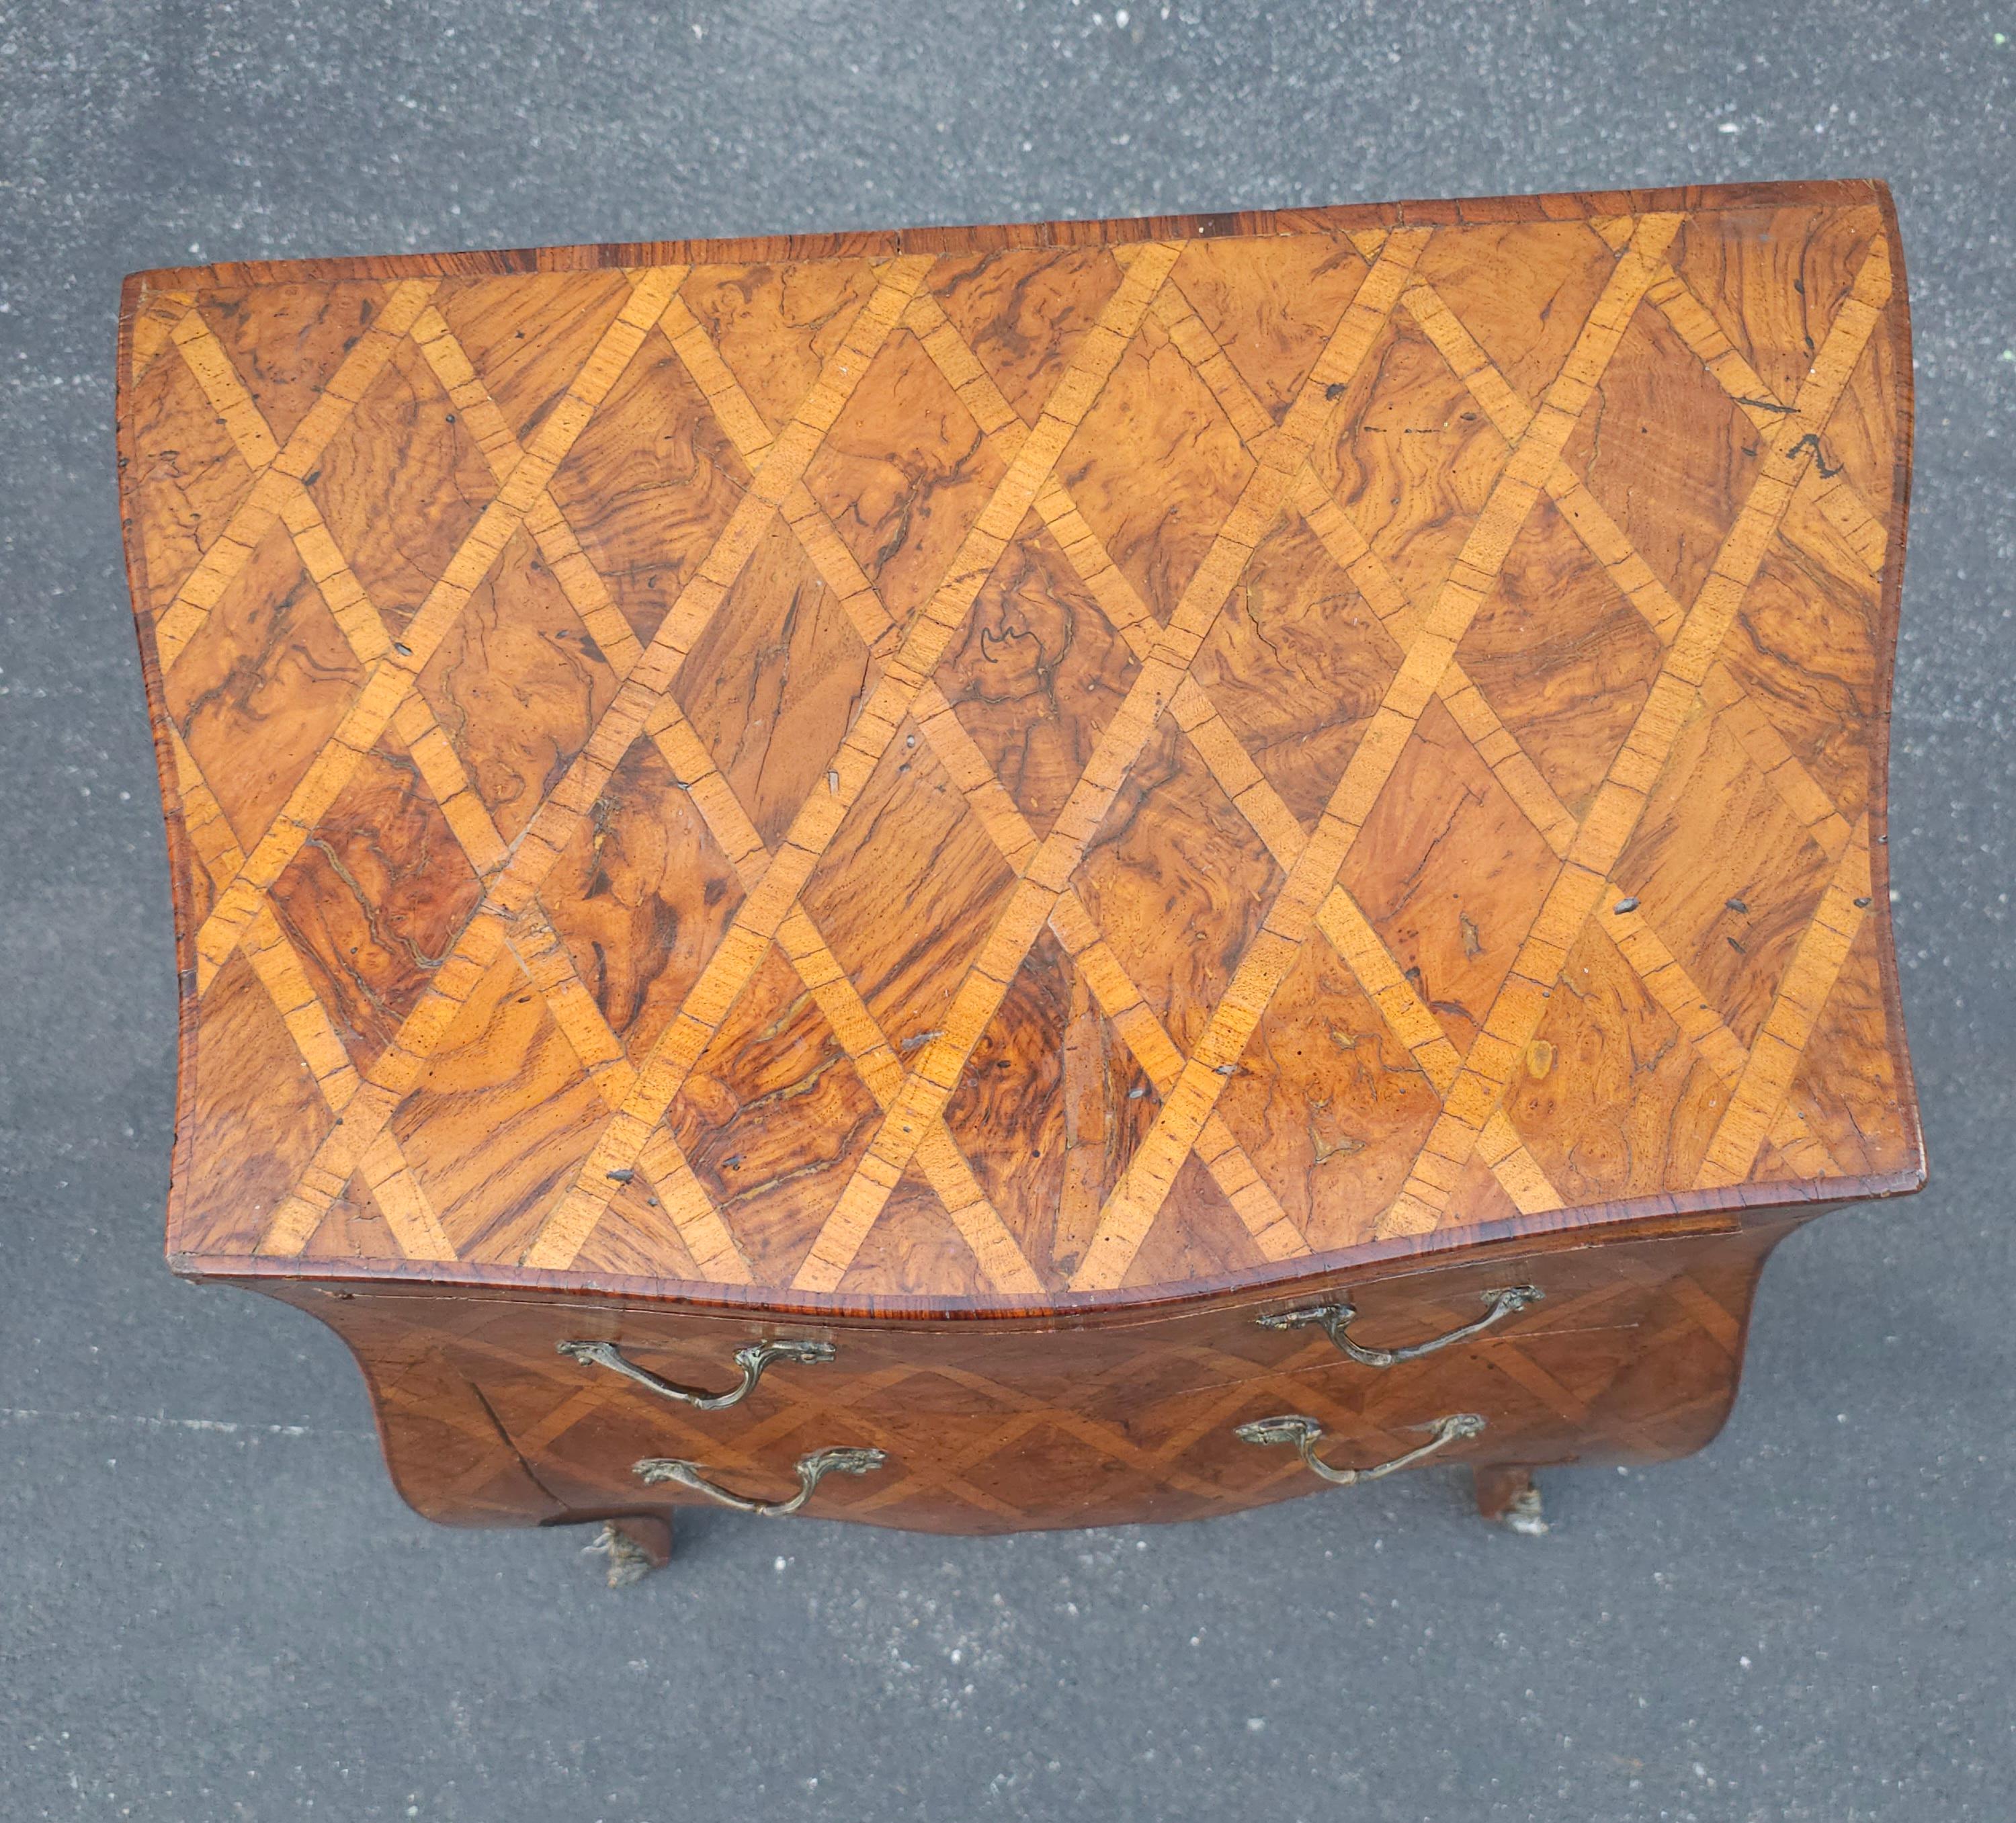 Kingwood 20th C. Italian Parquetry and Marquetry Petite Bombay Chest Commode Side Table For Sale